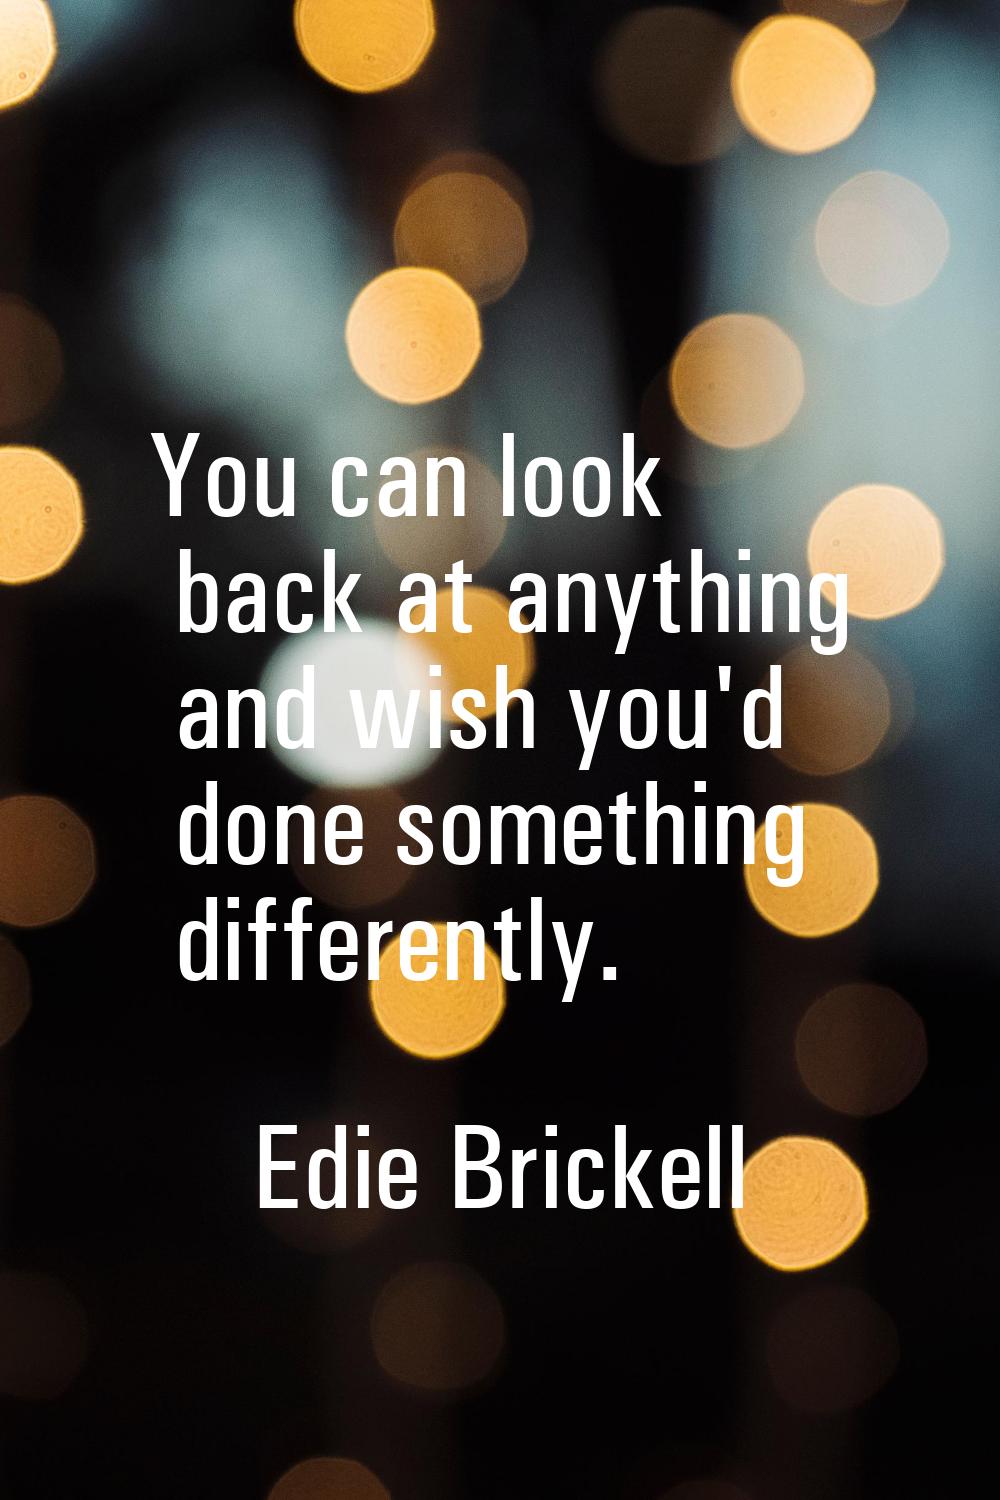 You can look back at anything and wish you'd done something differently.